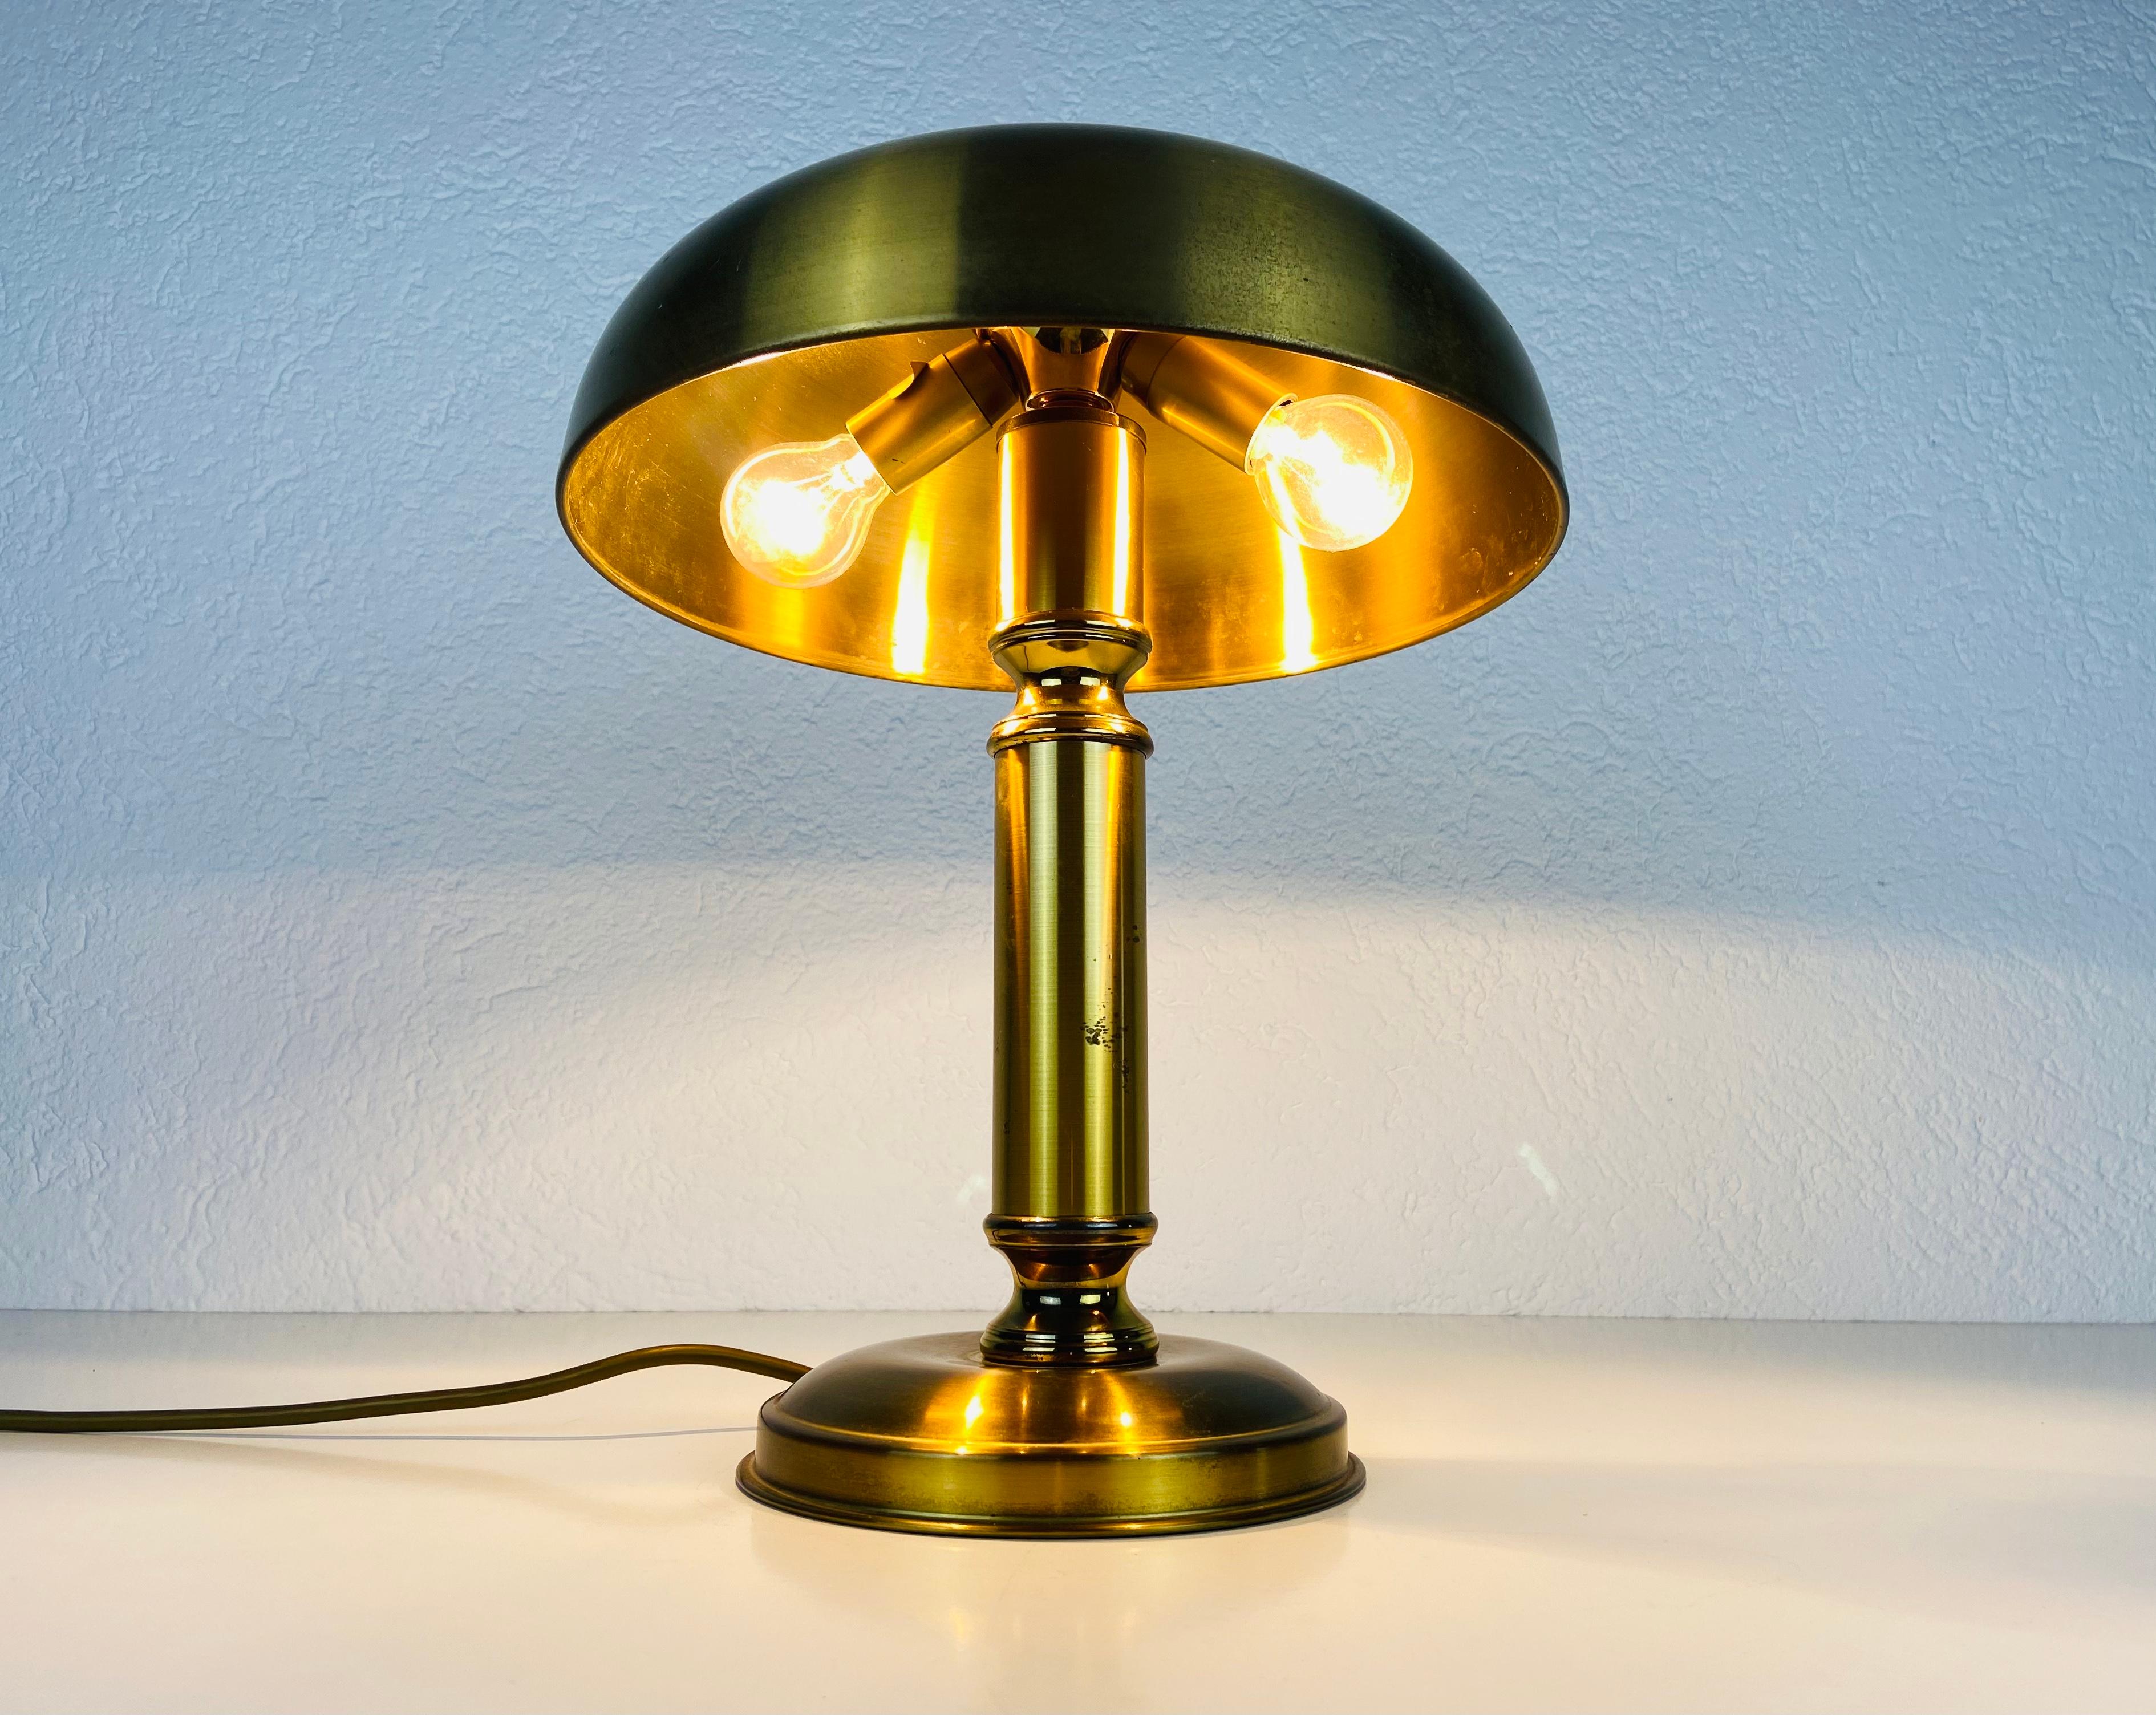 Mid-Century Modern 1 of 2 Midcentury Full Brass Table Lamps, 1960s, Germany For Sale